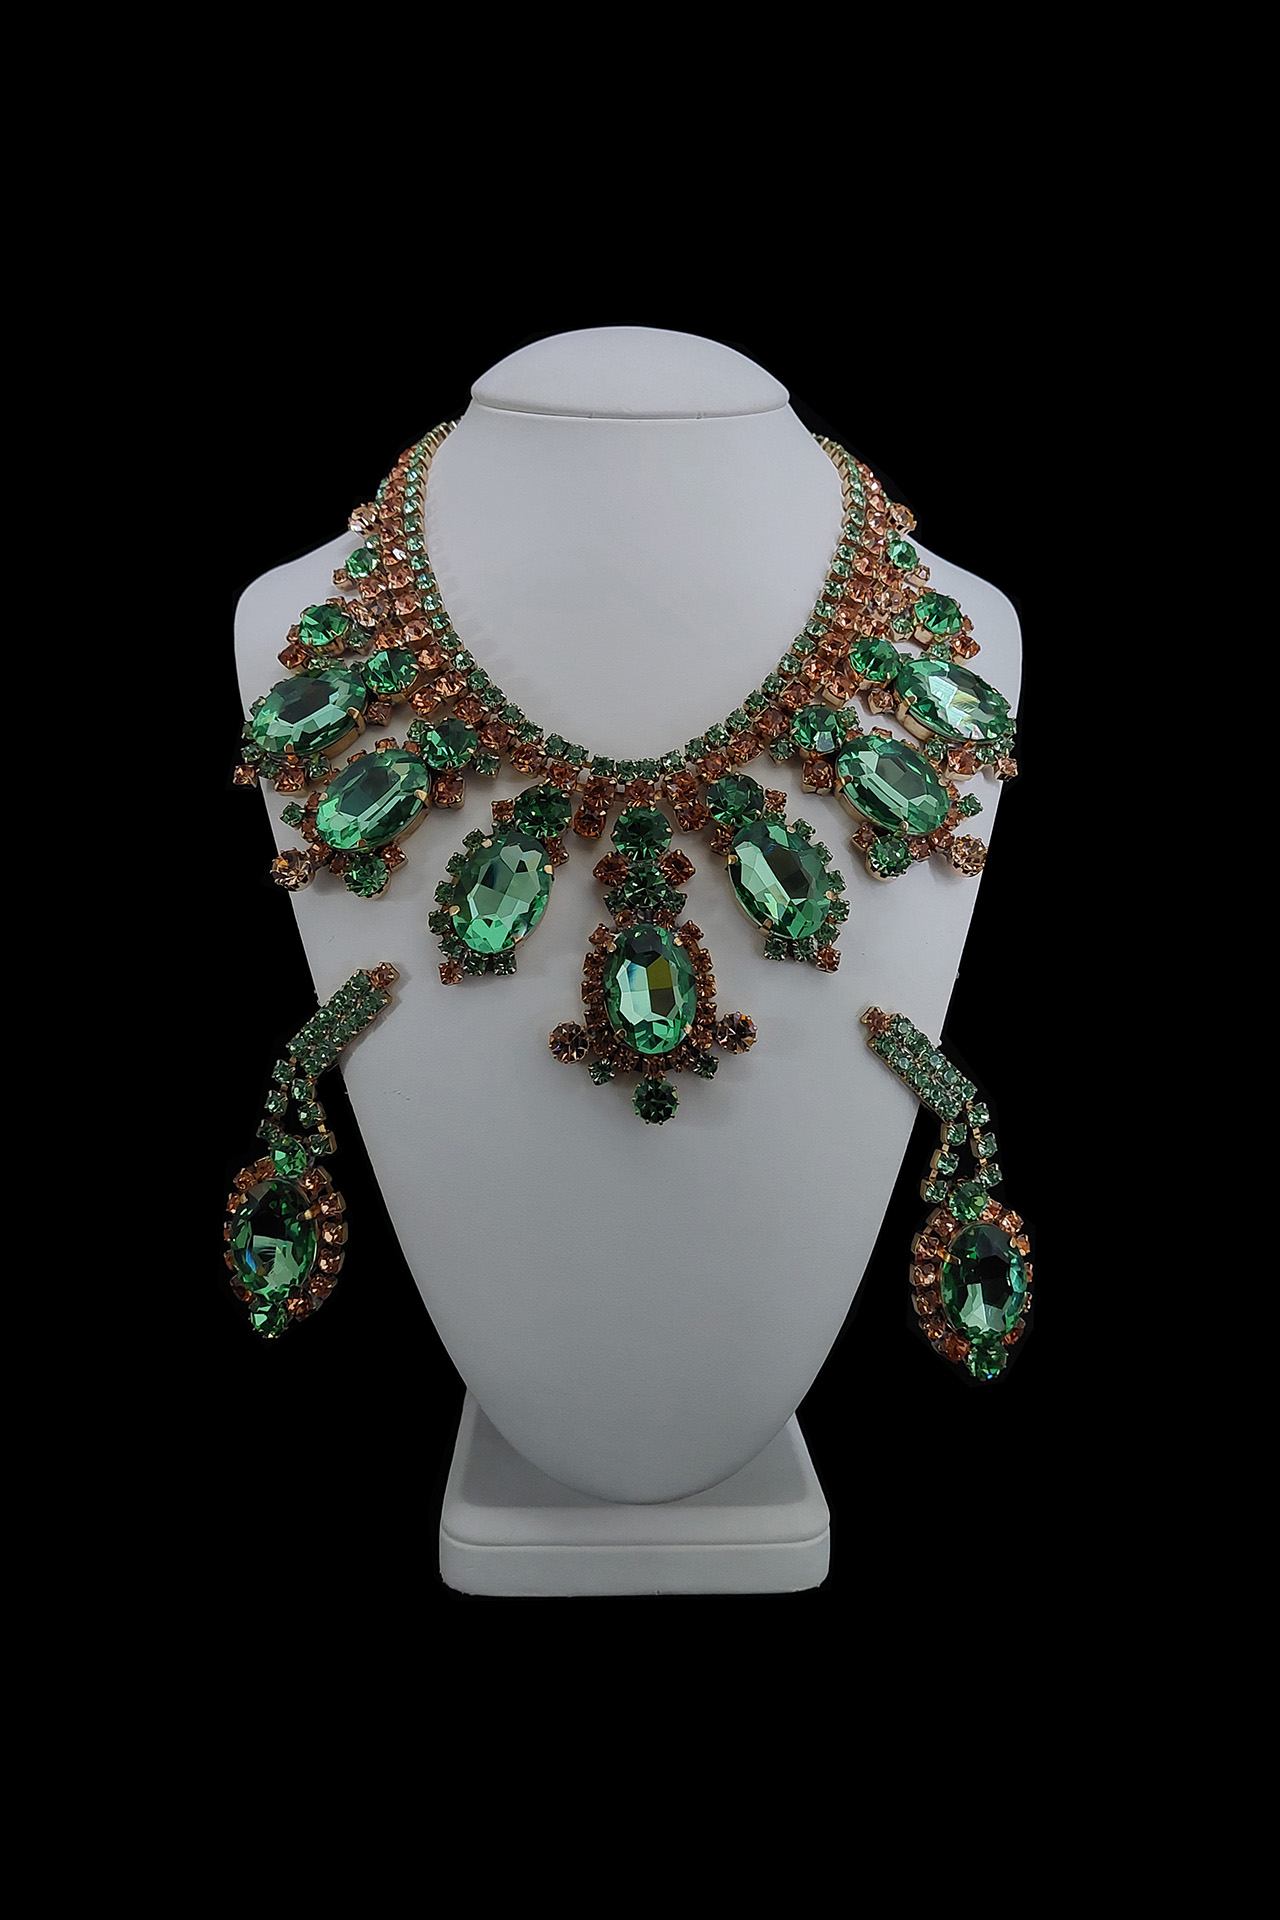 Handmade earrings and necklace from gold and peridot rhinestones